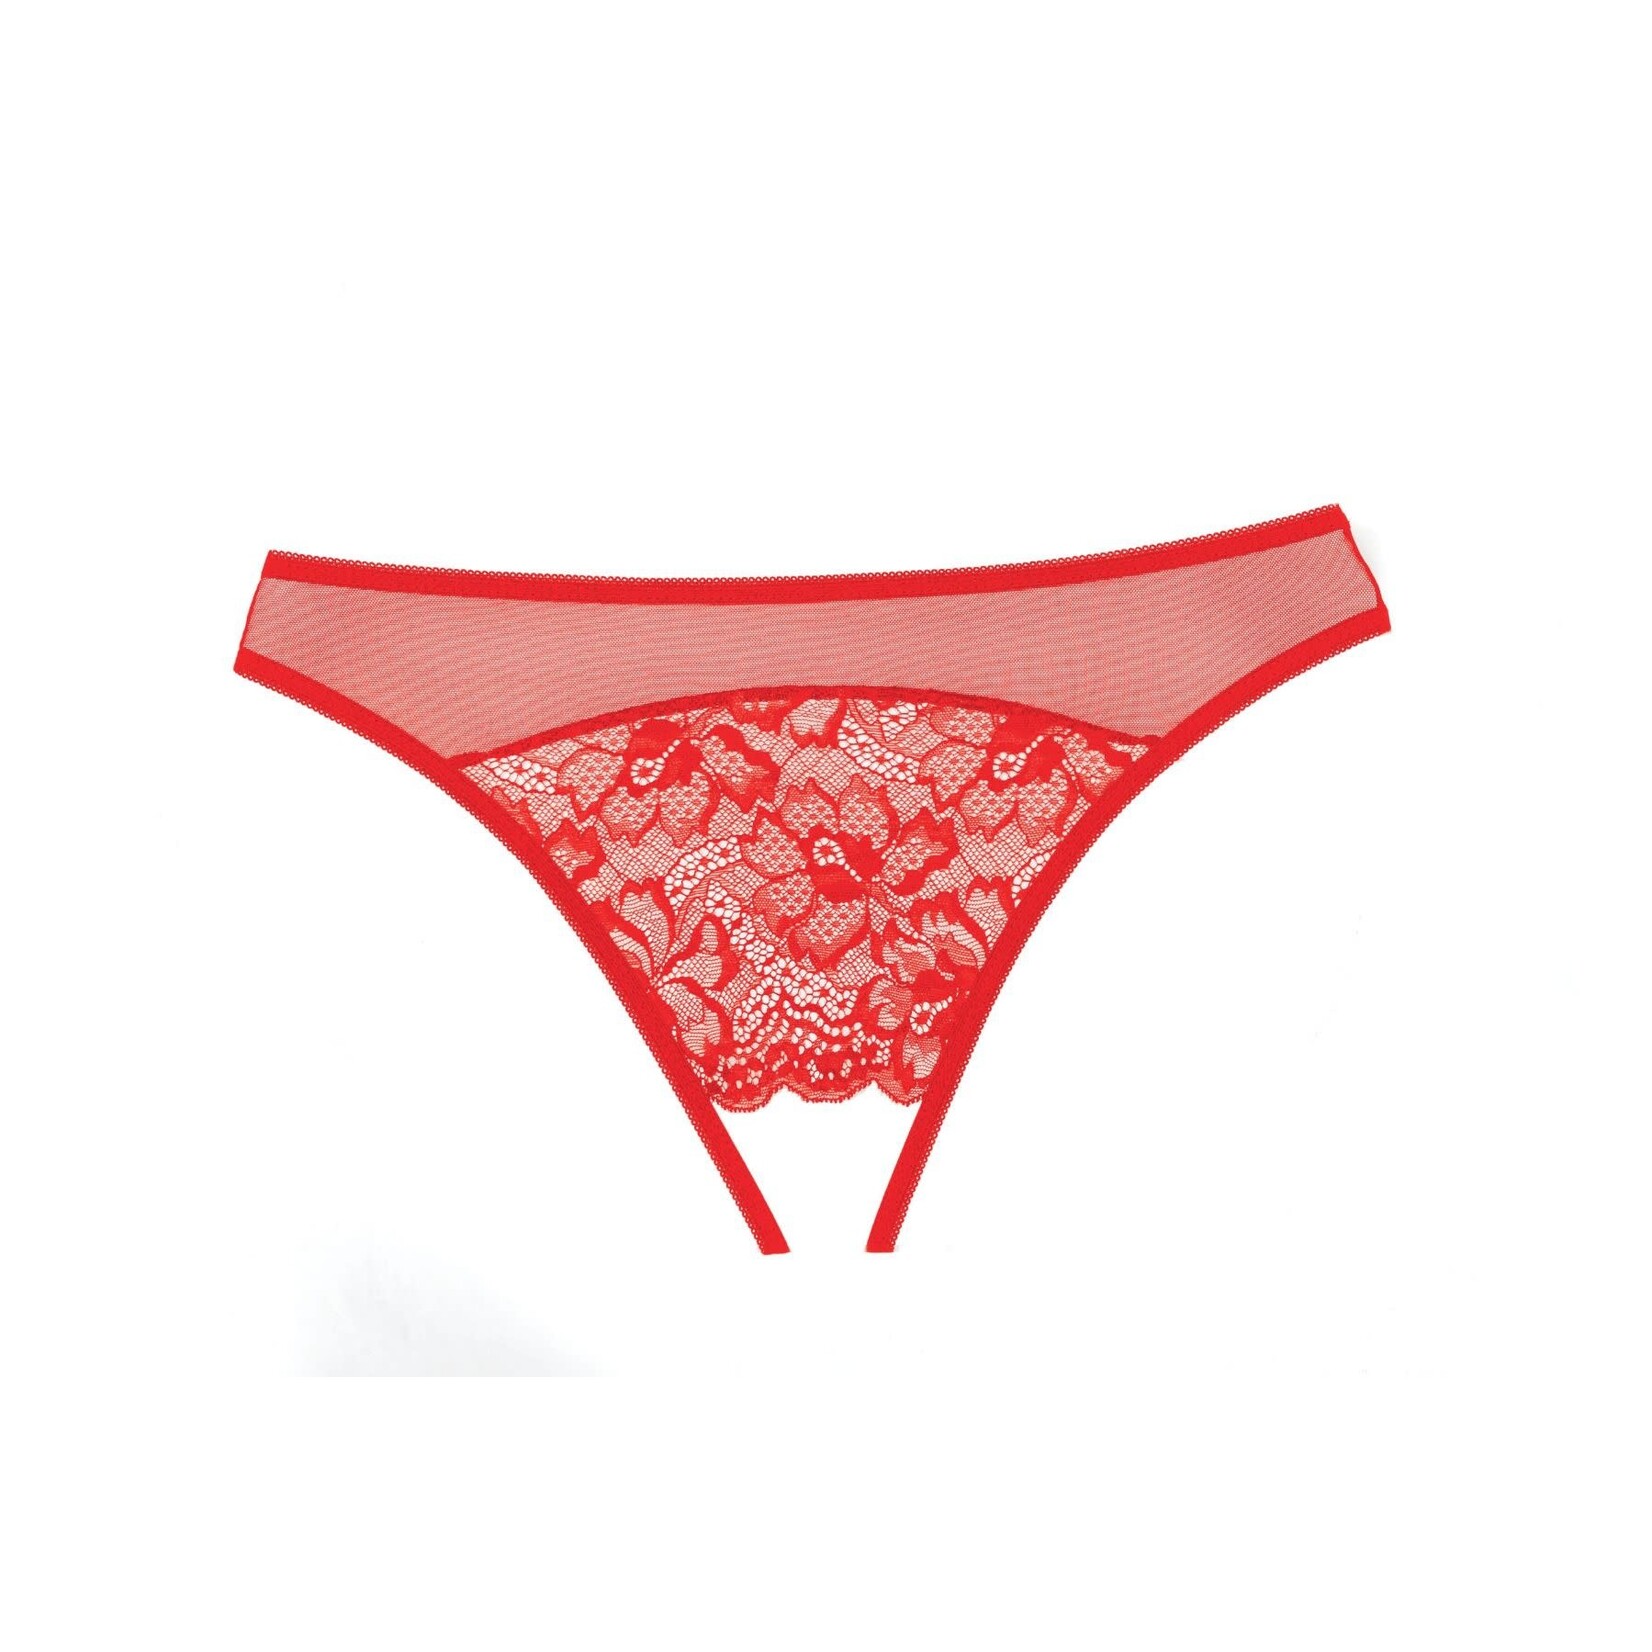 ALLURE LINGERIE ALLURE ADORE - JUST A RUMOUR PANTY - RED - ONE SIZE